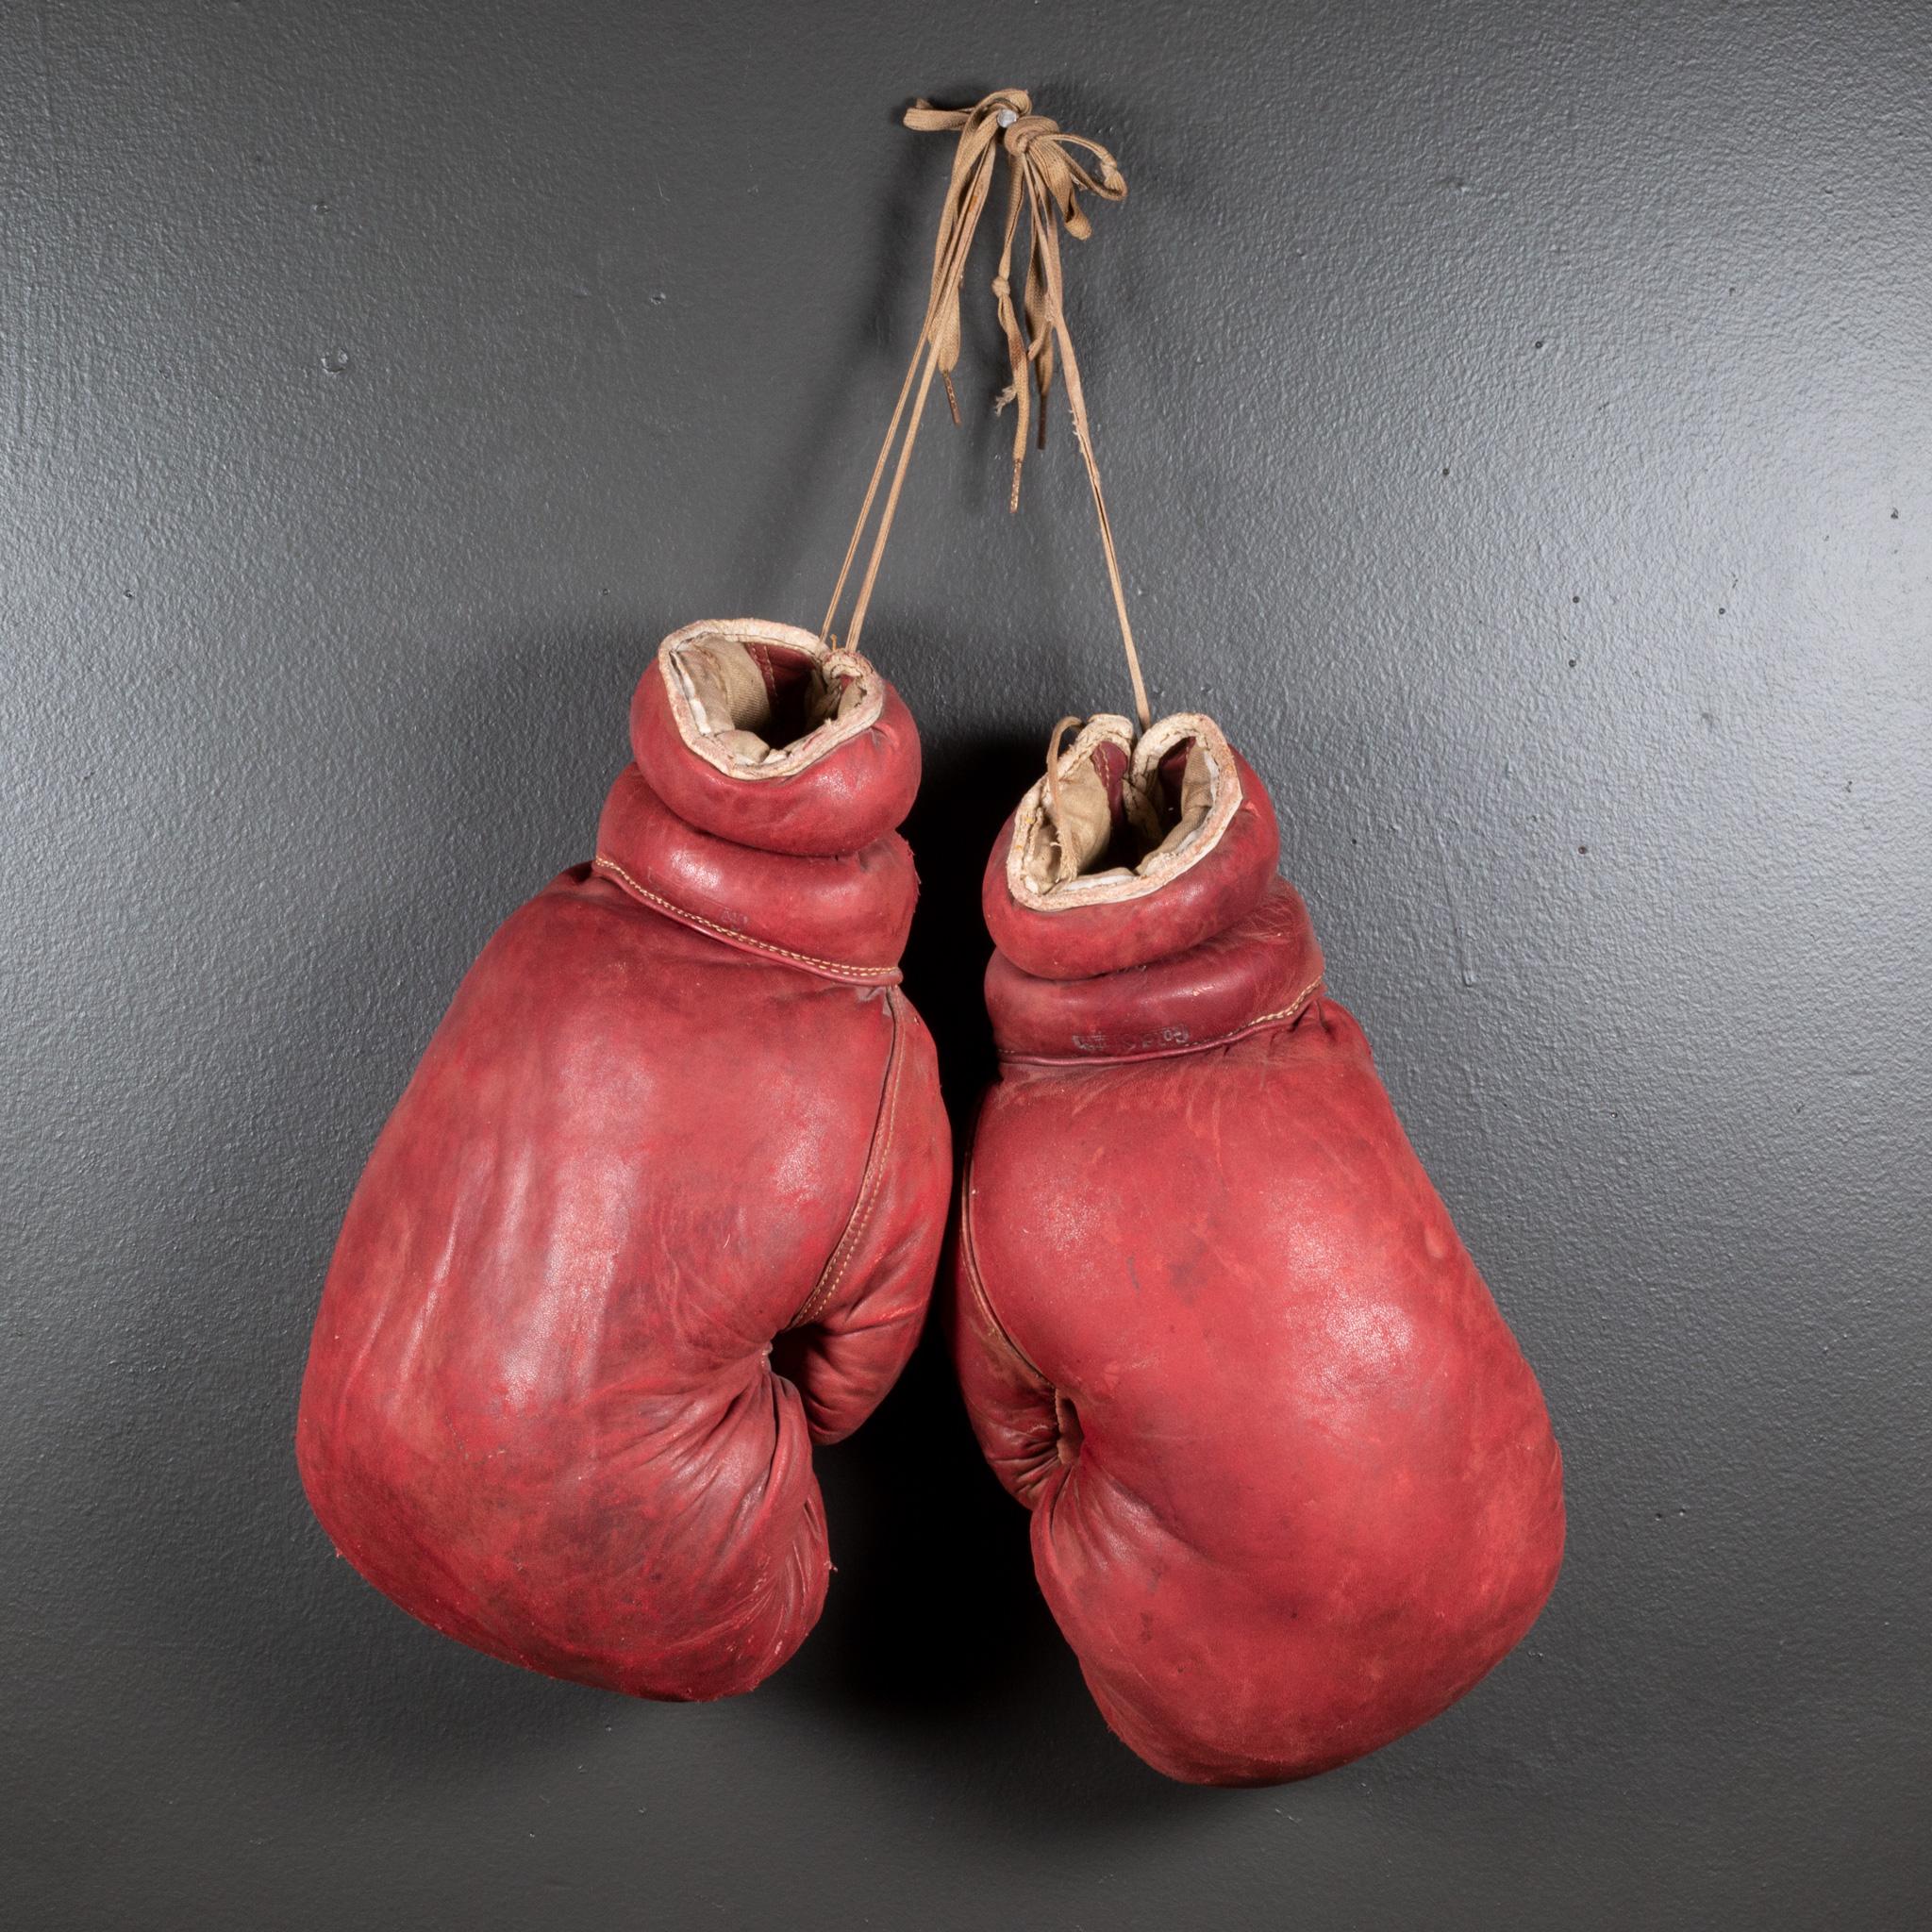 Industrial Large Vintage Gold Smith Leather Boxing Gloves c.1950